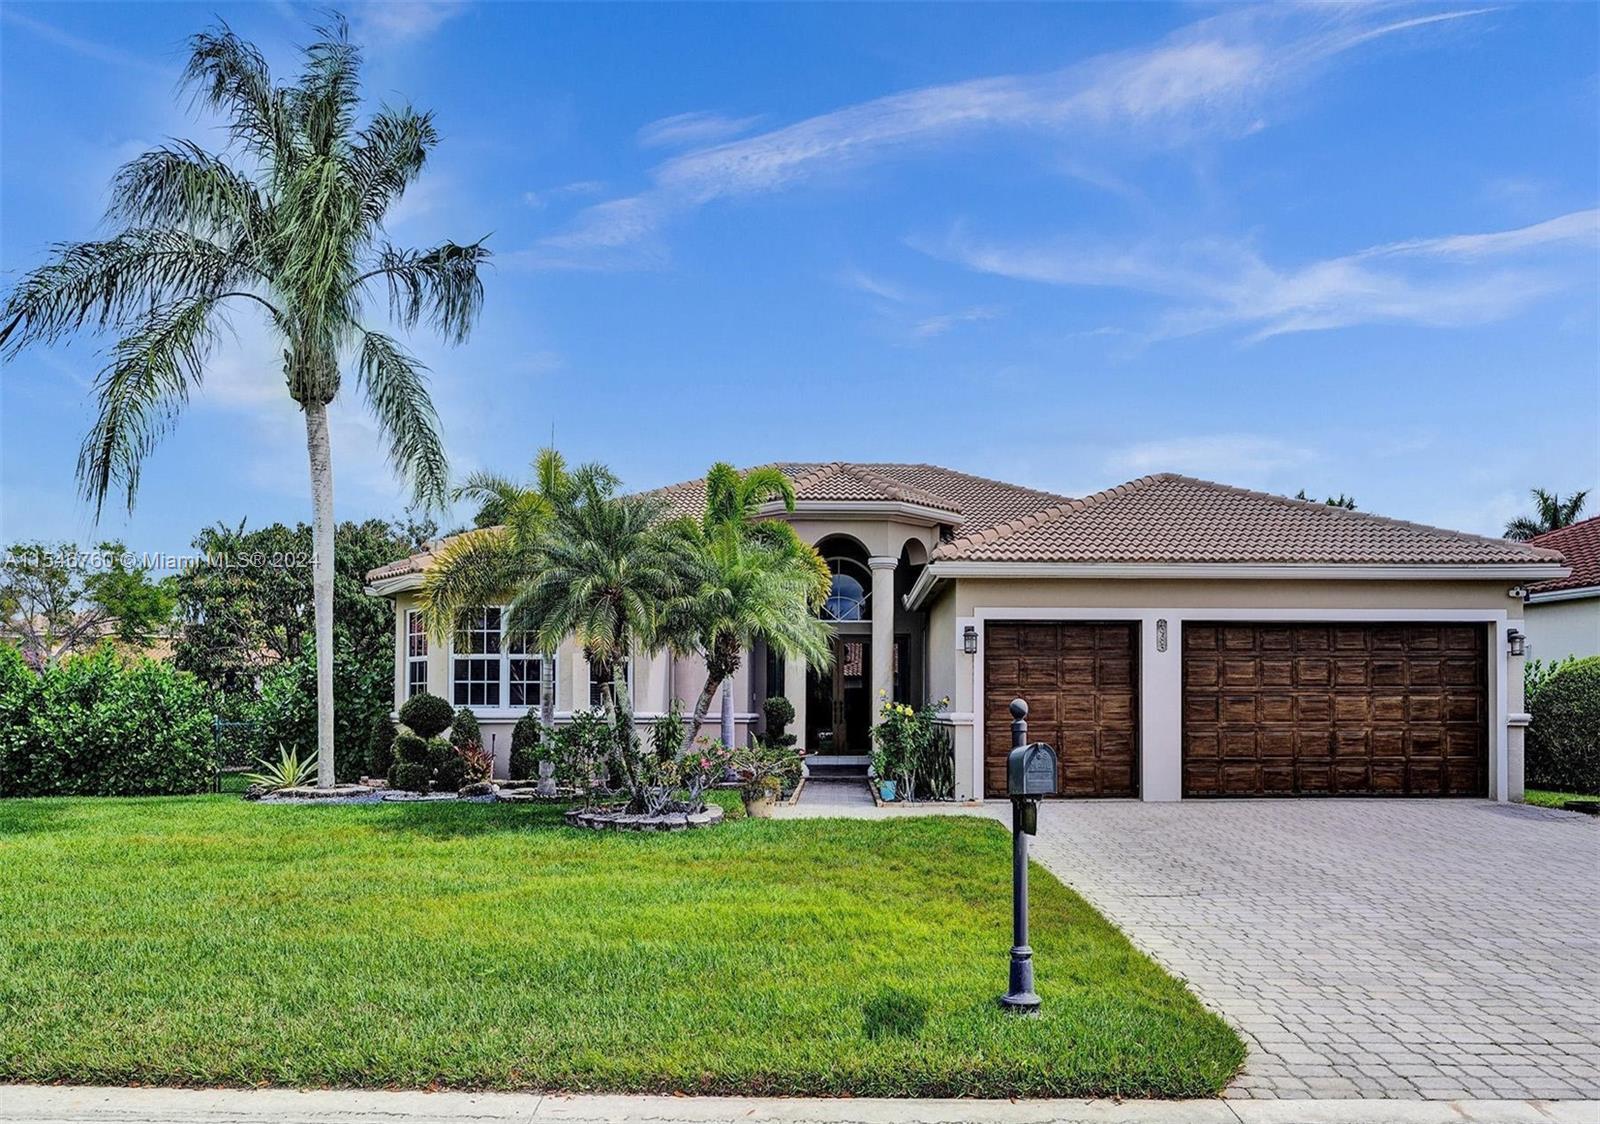 Photo of 4985 NW 120th Ave in Coral Springs, FL